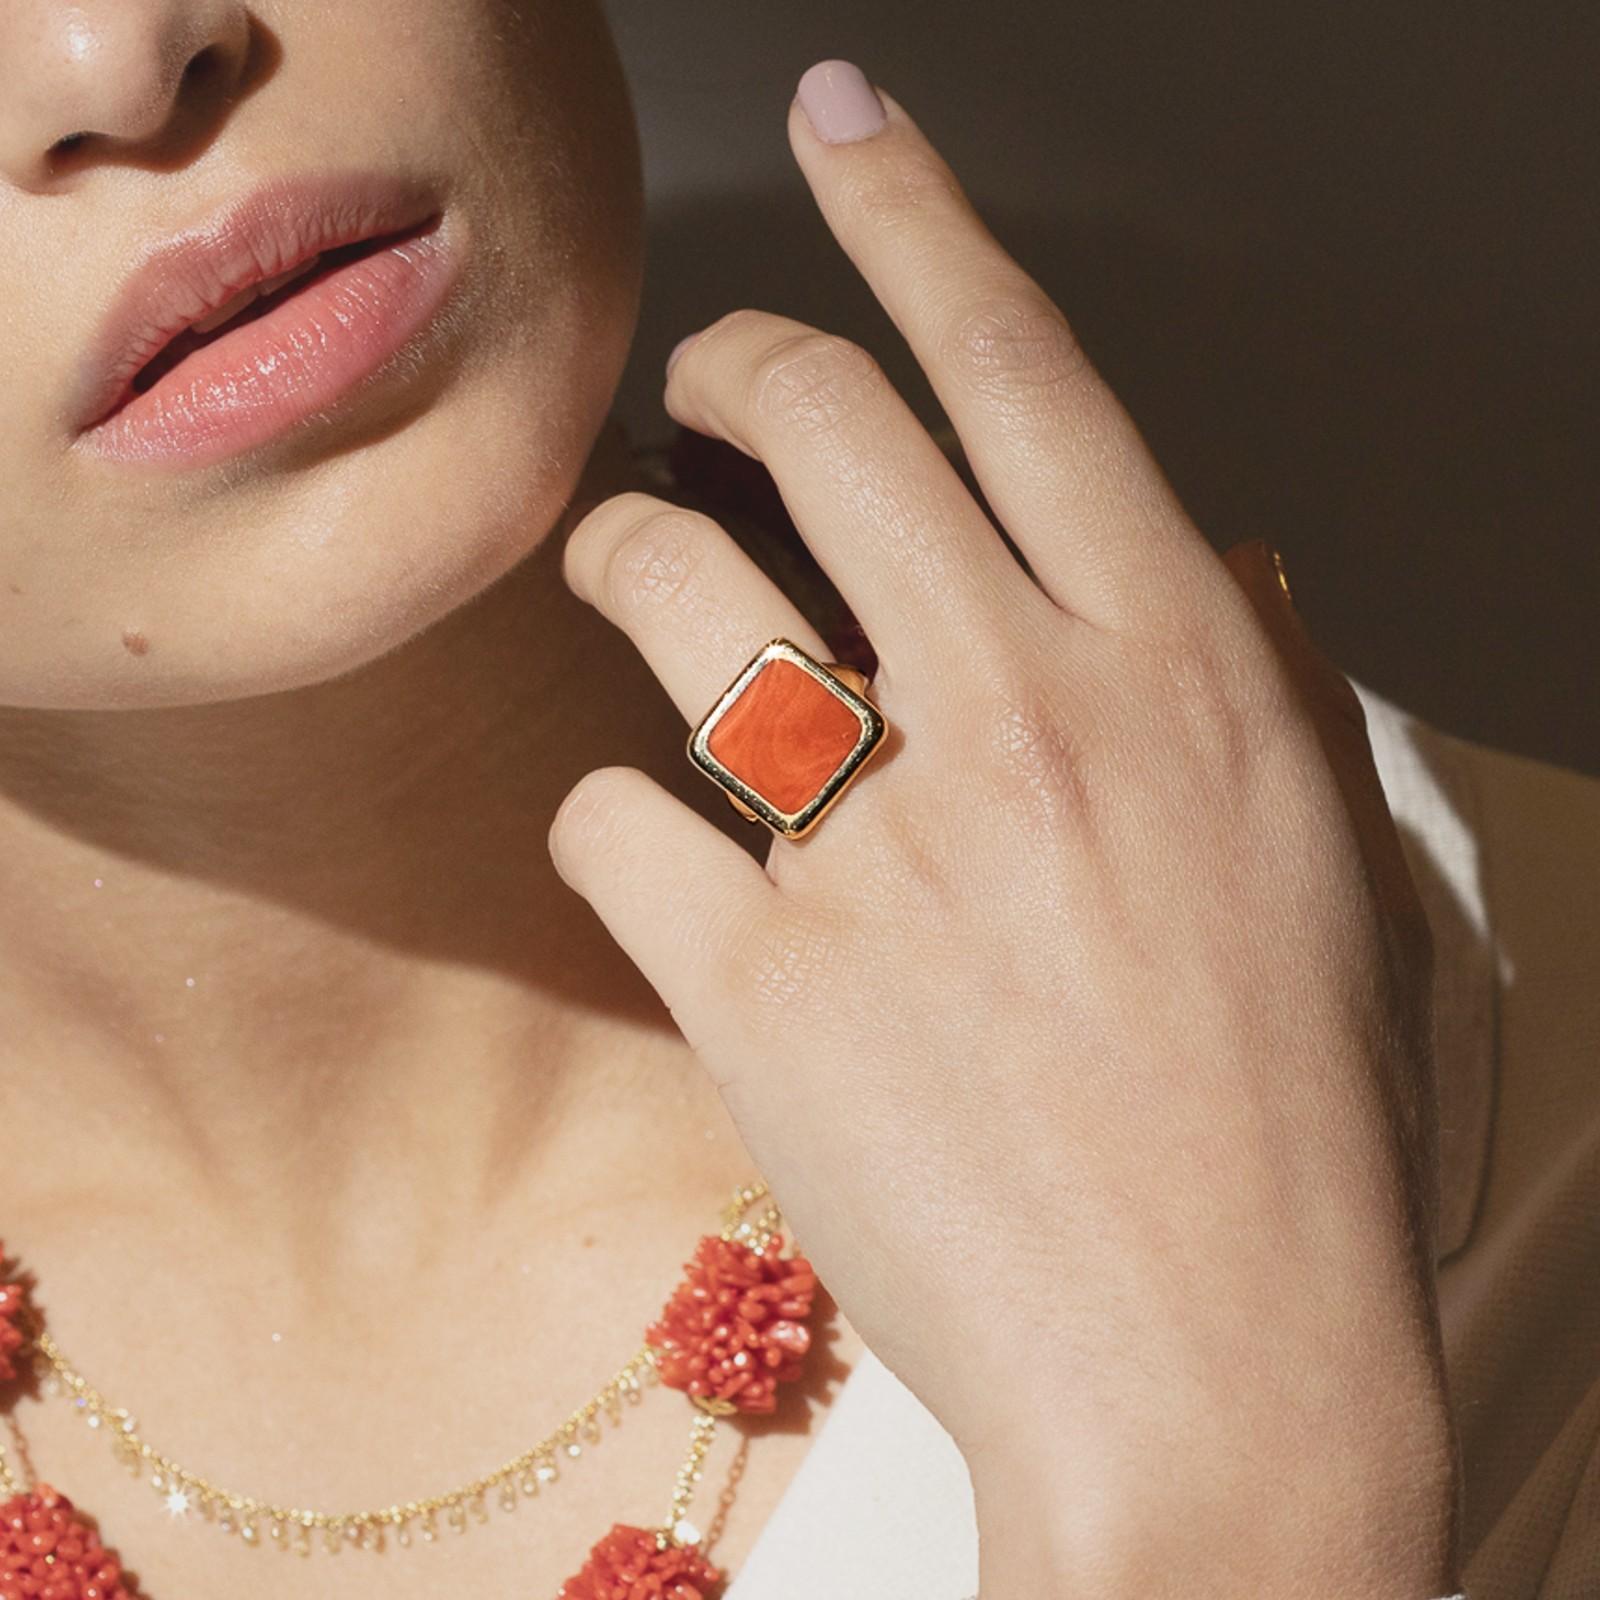 Alex Jona design collection, hand crafted in Italy, 18 carat yellow gold ring set with a squared flat cut Mediterranean Coral.
Alex Jona jewels stand out, not only for their special design and for the excellent quality of the gemstones, but also for